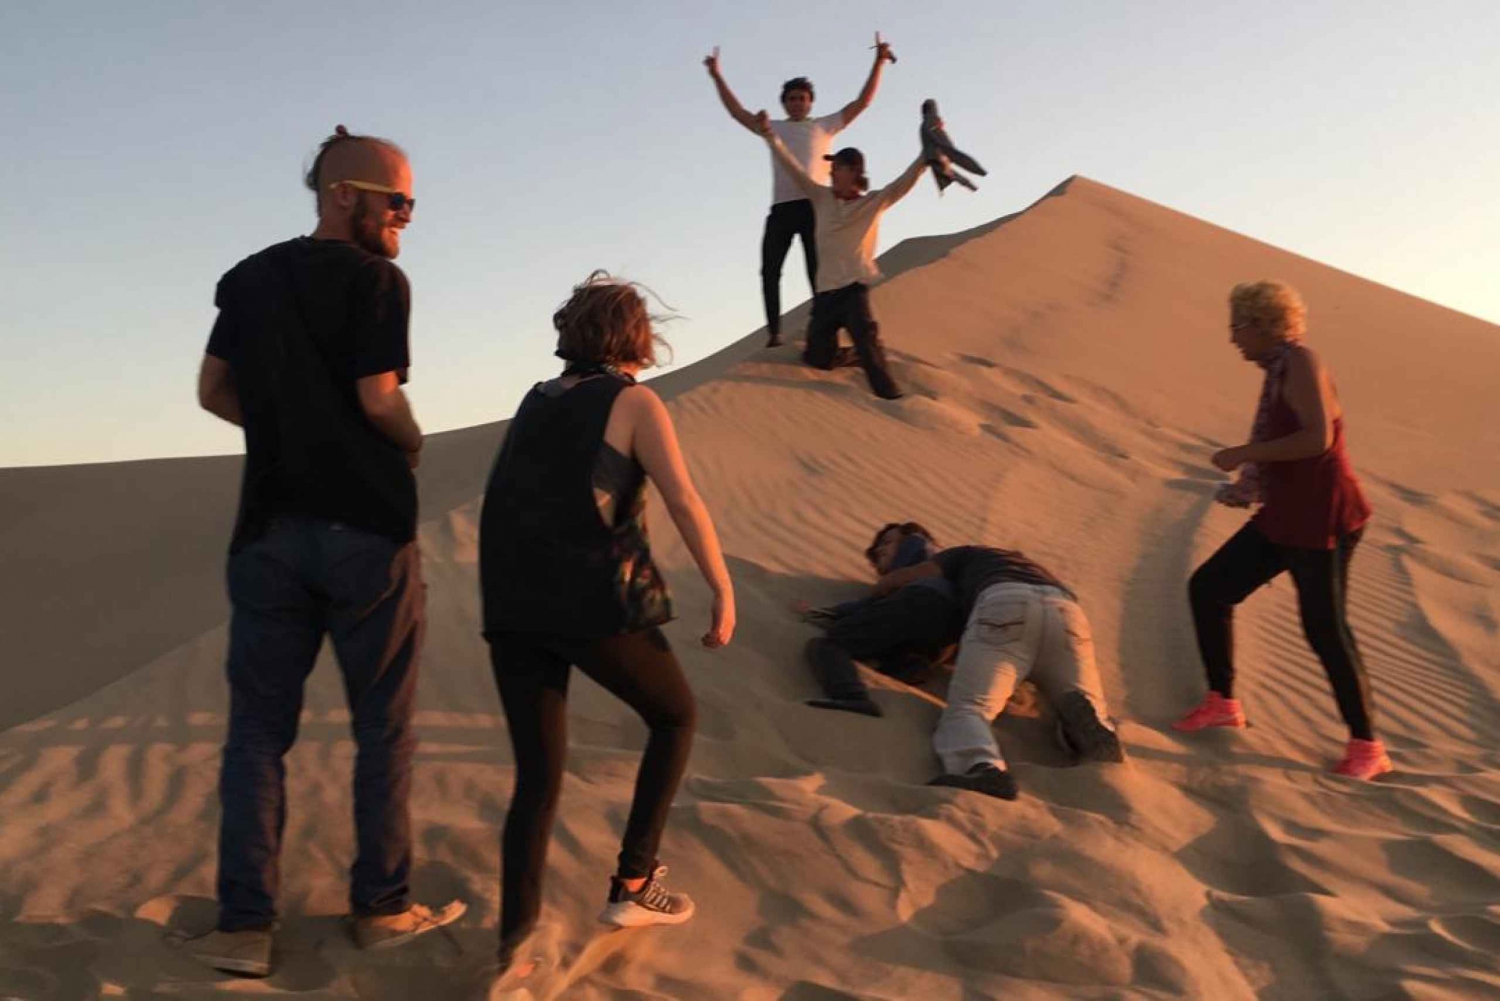 From Paracas or Pisco: Private Tour to Huacachina Oasis